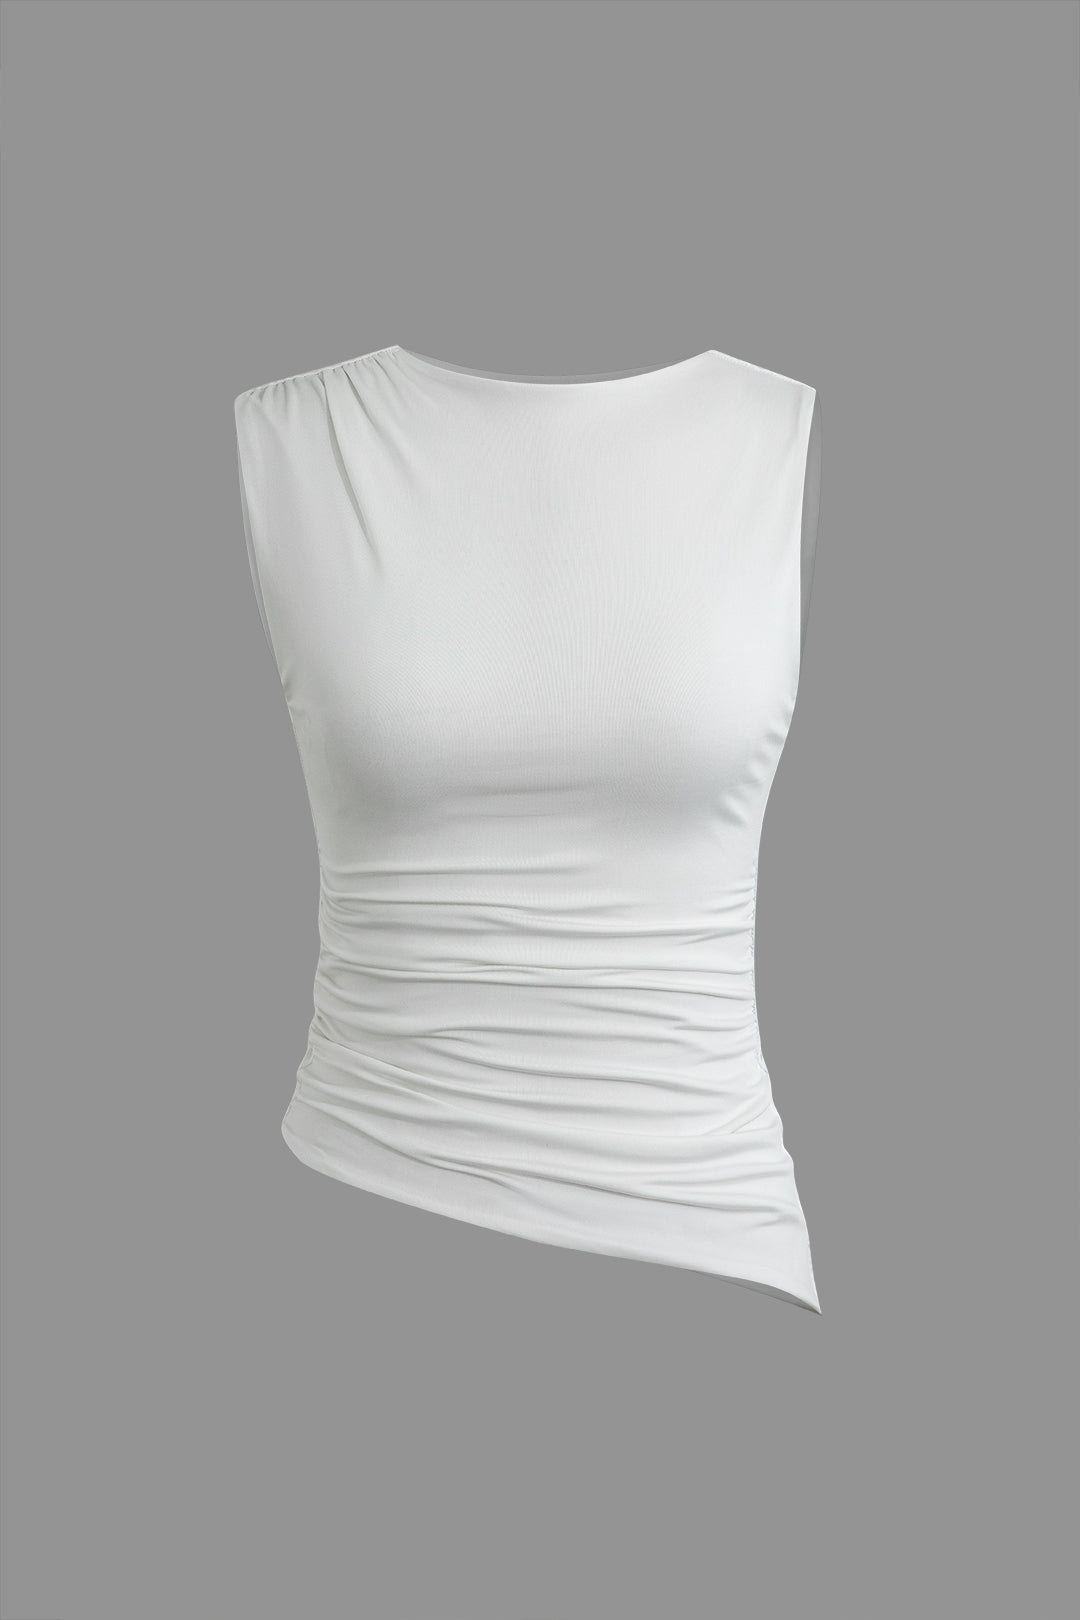 Asymmetrical Ruched Tank Top